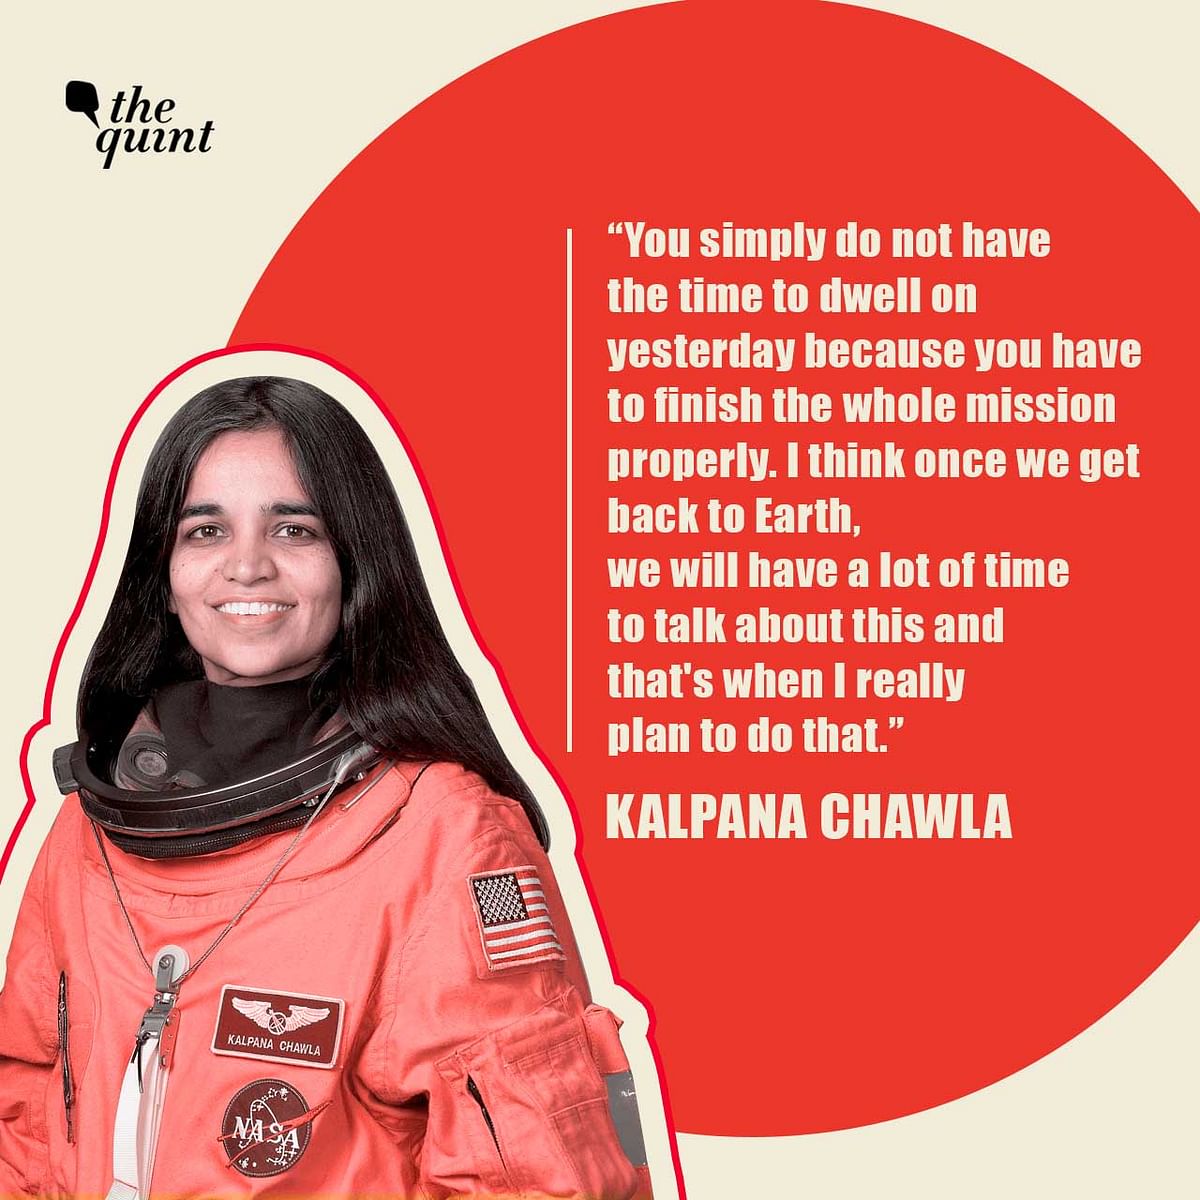 Lofty dreams and grit took her to space twice. The journey of Kalpana Chawla – the first India-born woman in space.